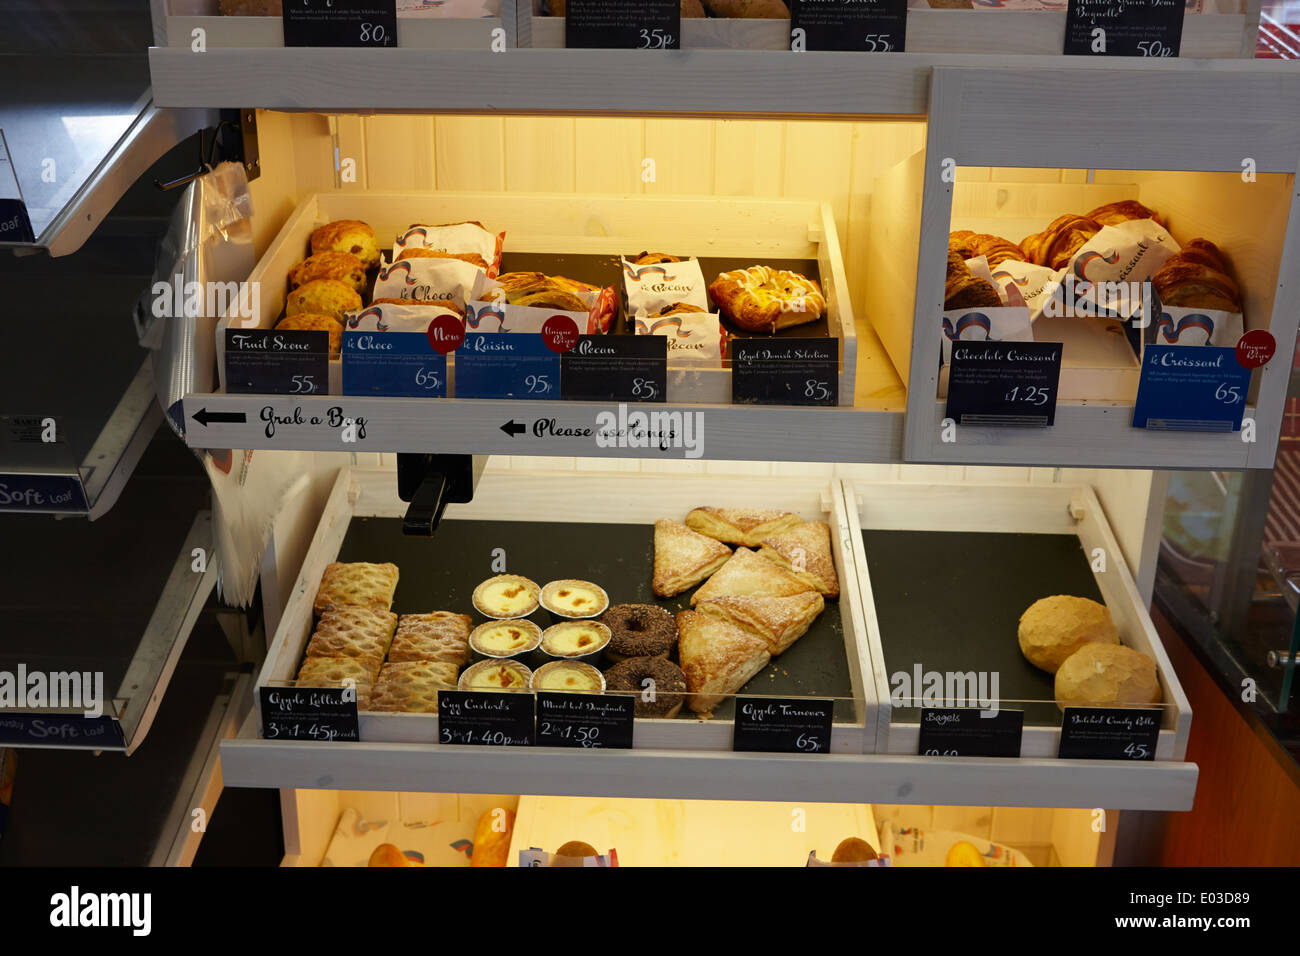 cuisine de france pastries on display in a filling station convenience store in northern ireland Stock Photo